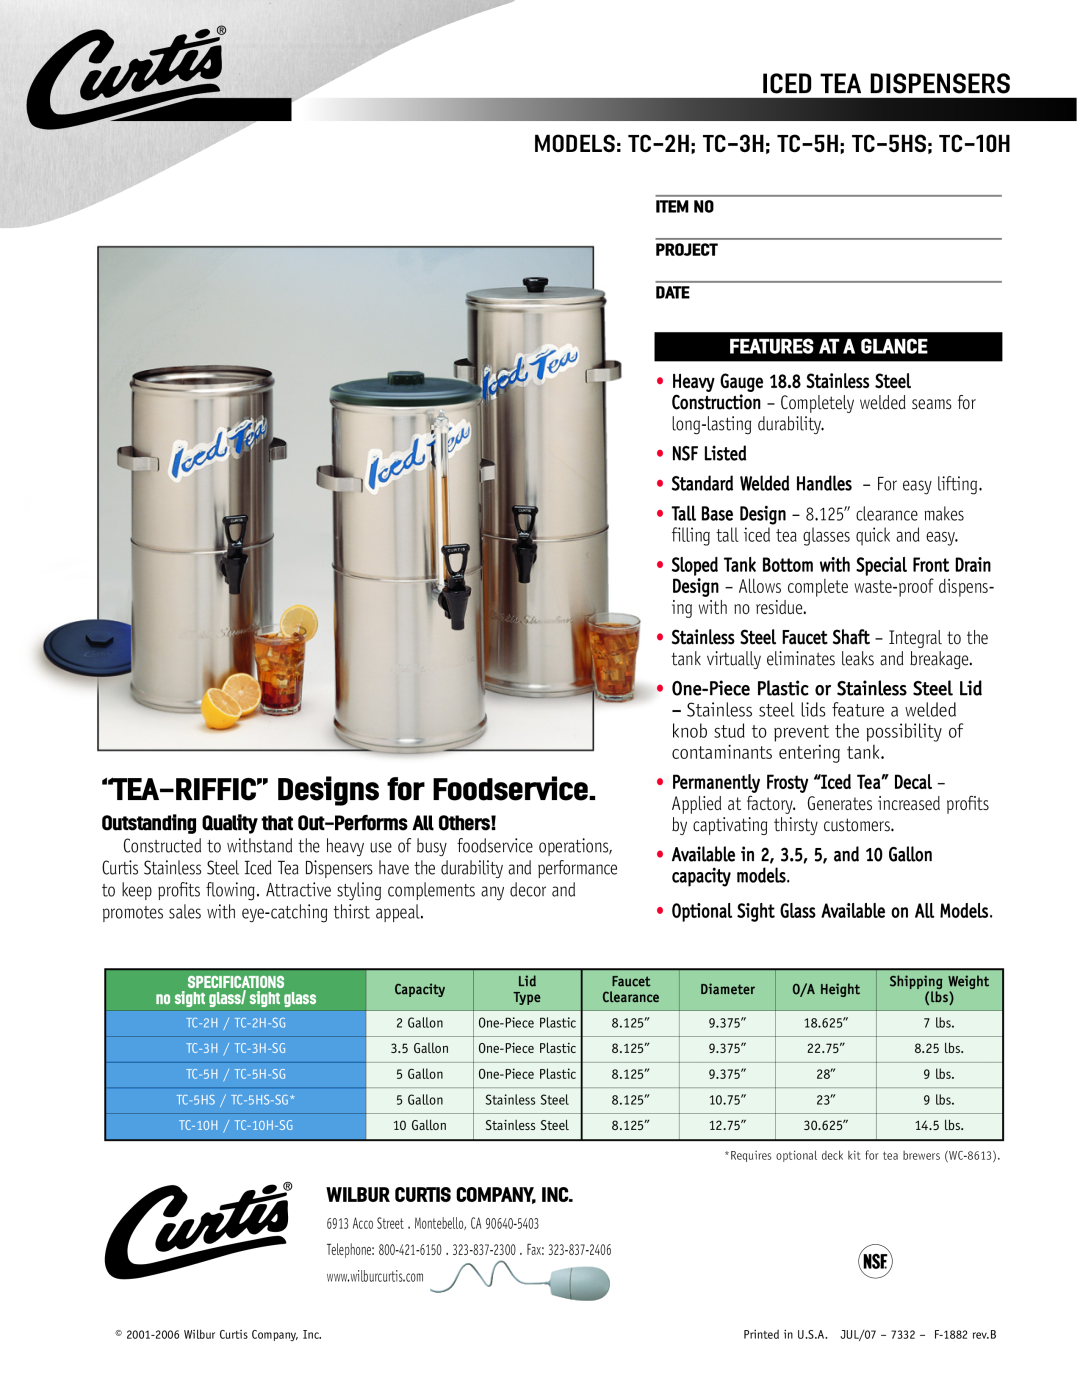 Wibur Curtis Company TC-2H specifications “TEA-RIFFIC”Designs for Foodservice, Iced Tea Dispensers, Features At A Glance 